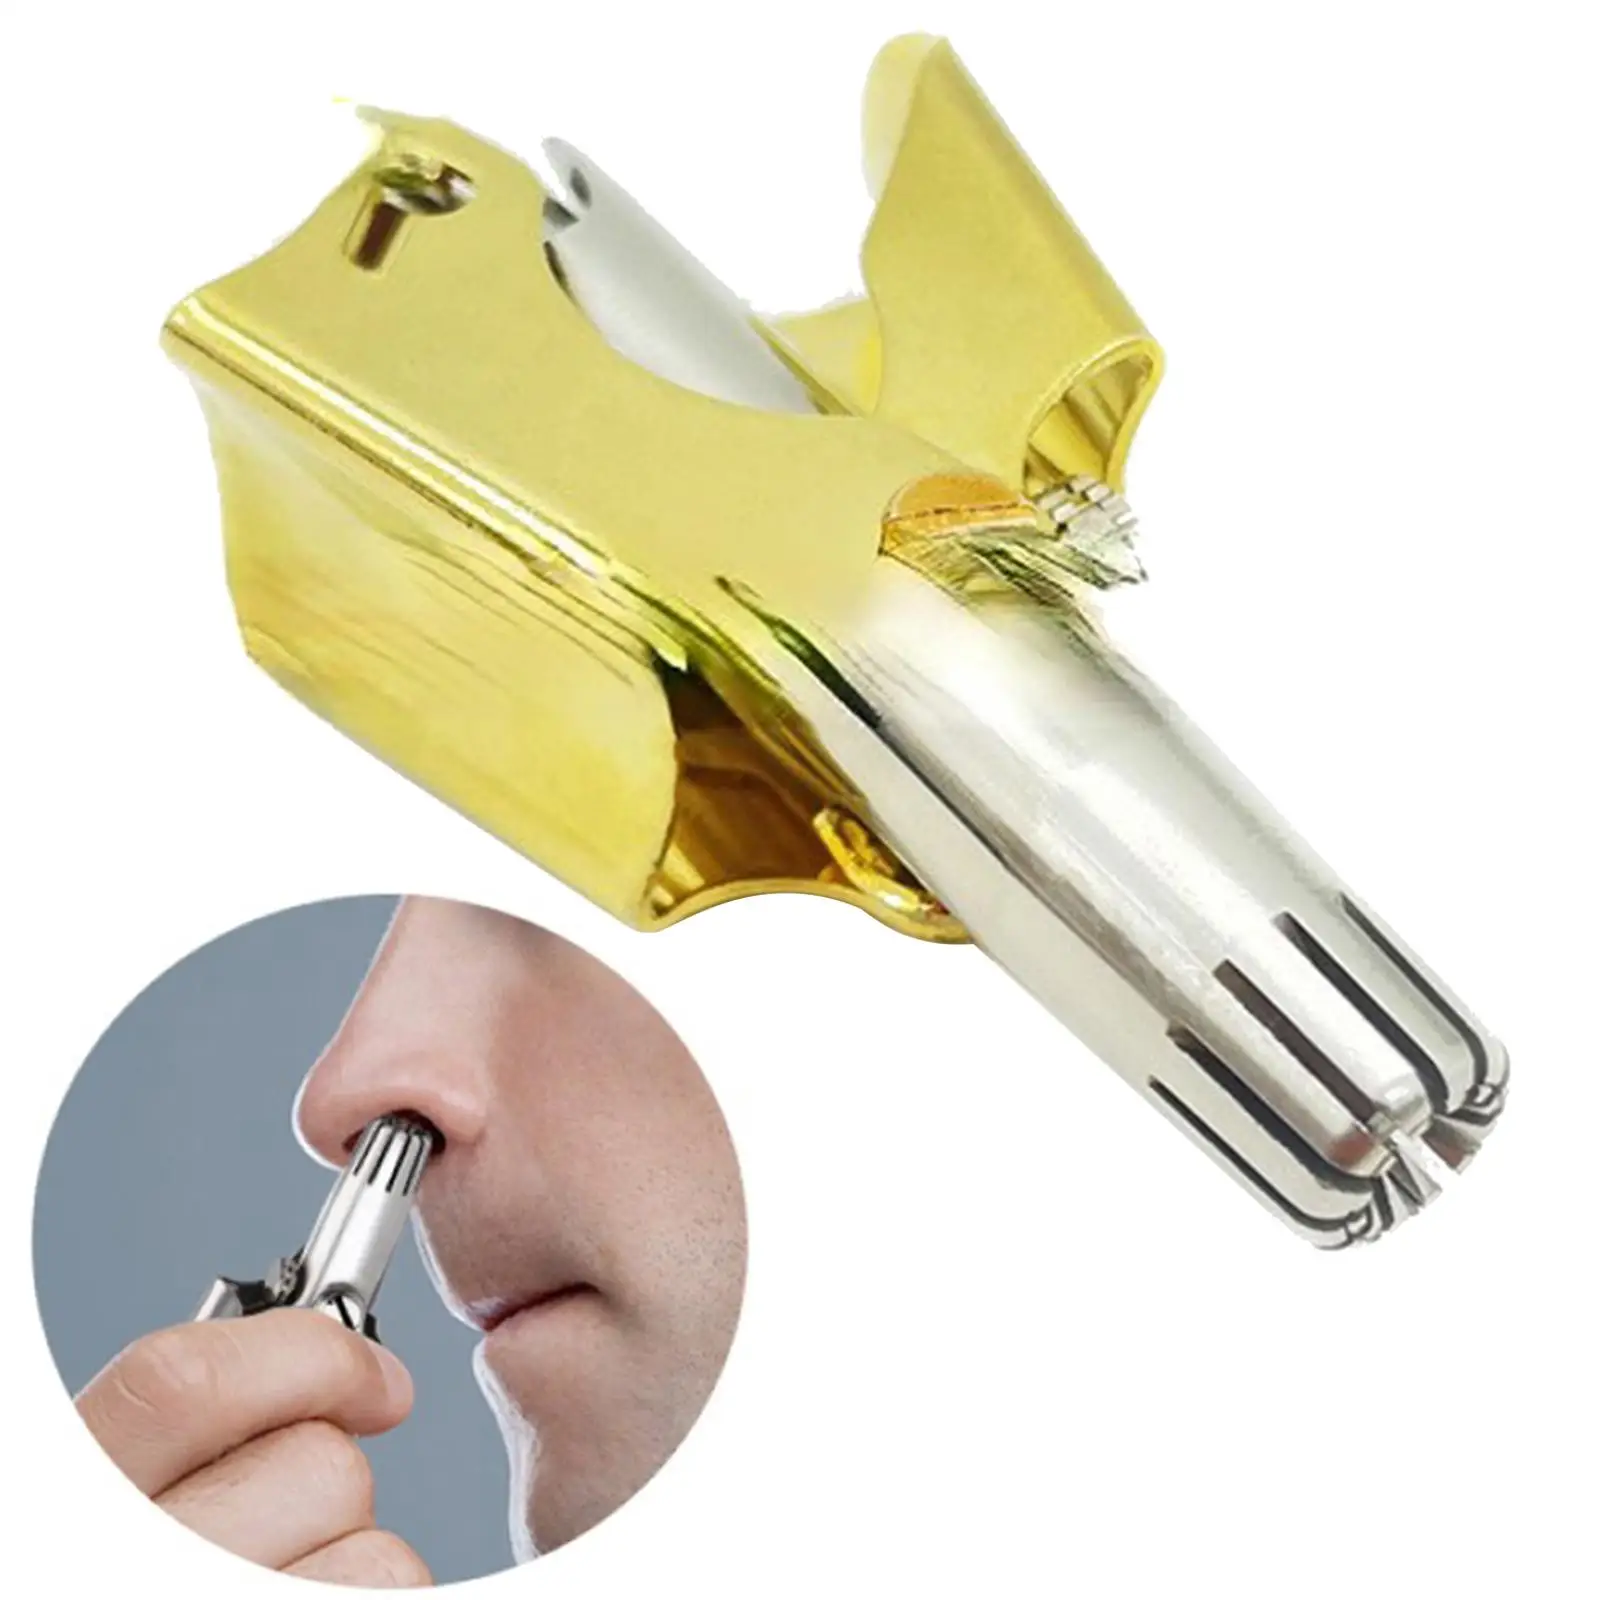 Stainless Steel Manual Nose Trimmer Washable Nose Razor Shaver No Batteries Required Ear Hair Cutter Gifts